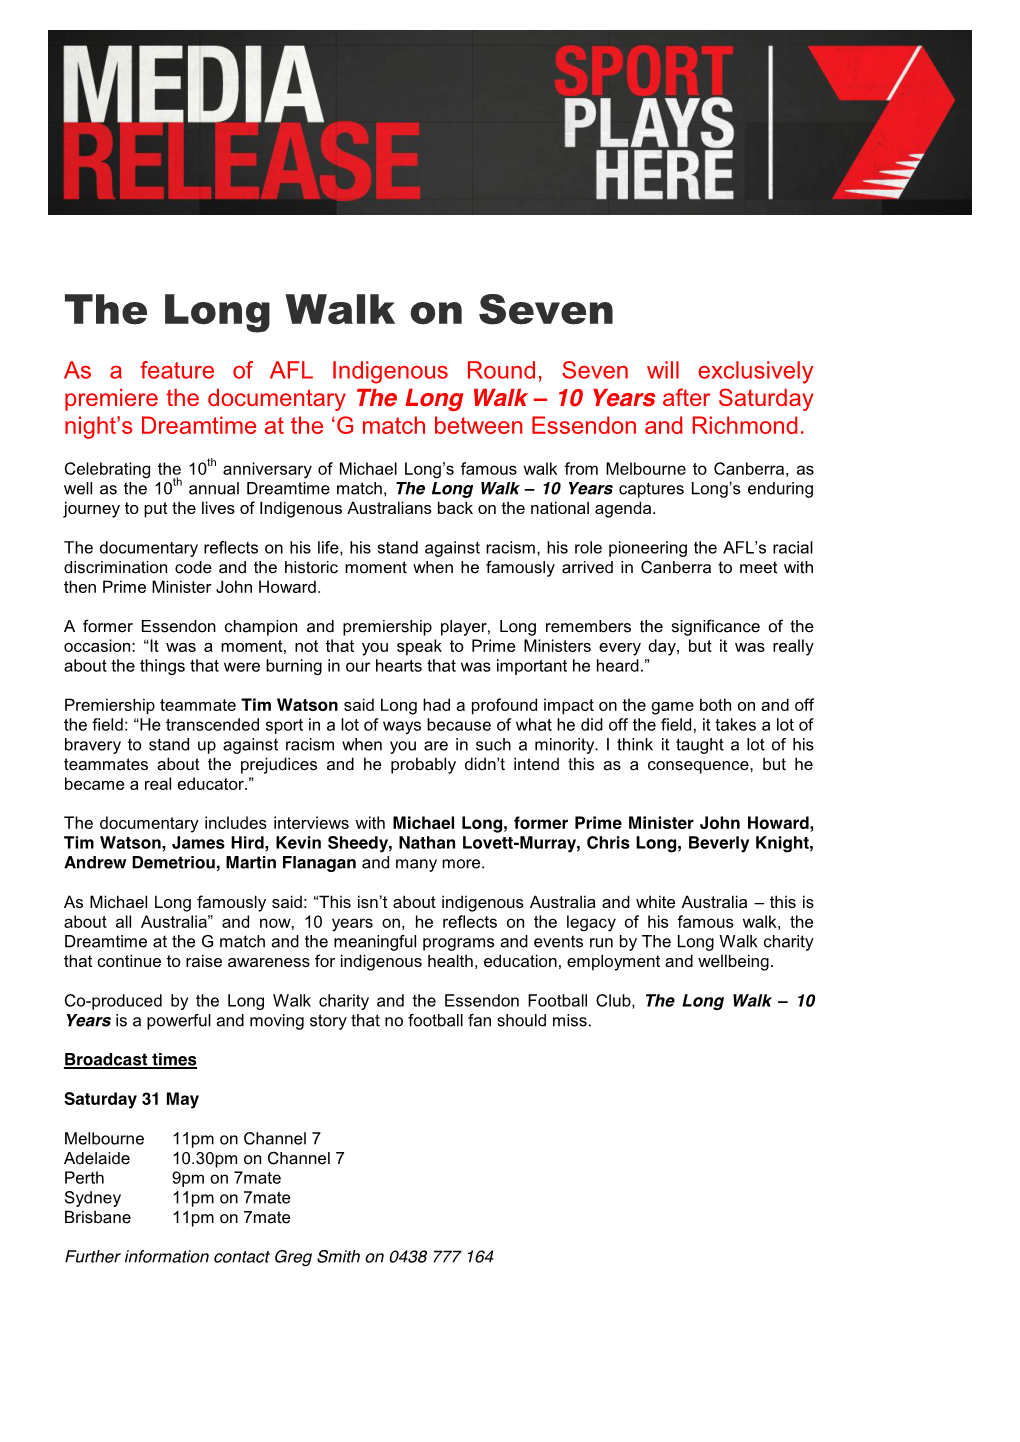 The Long Walk on Seven